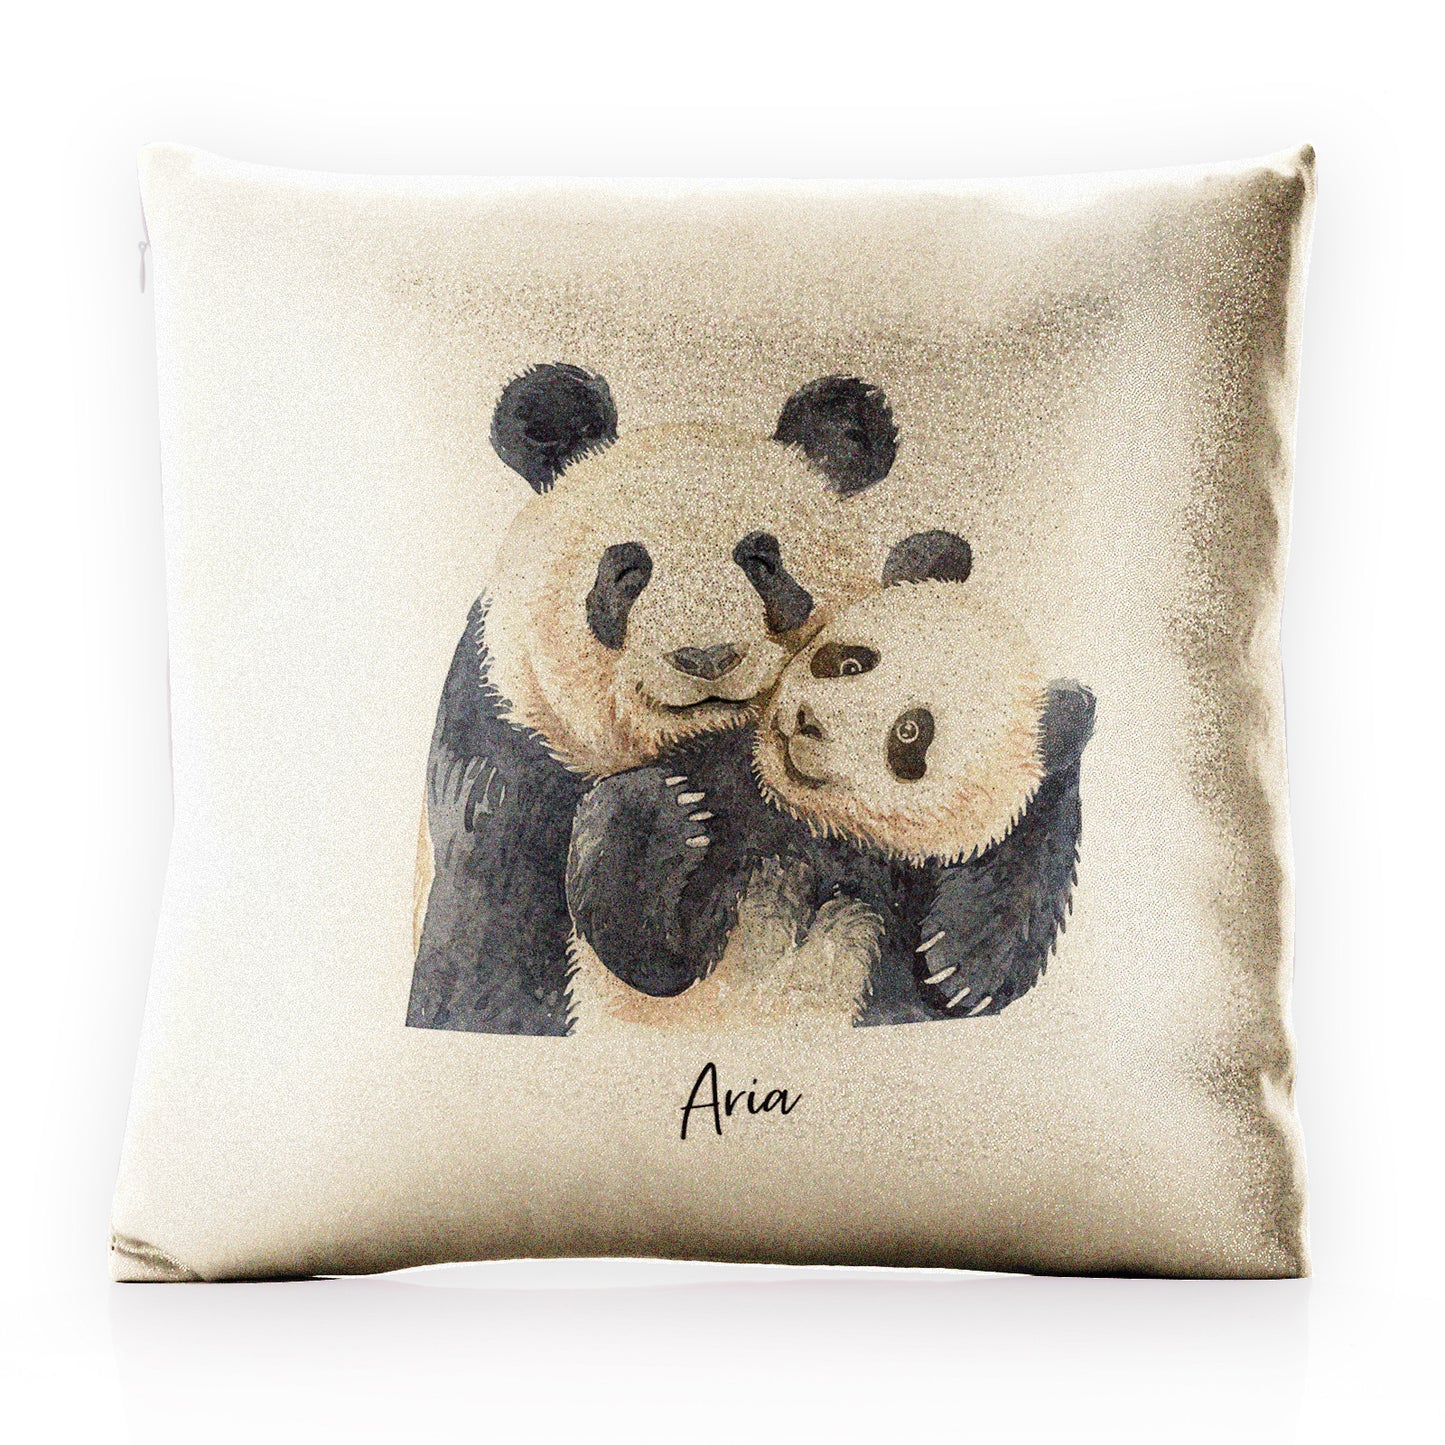 Personalised Glitter Cushion with Welcoming Text and Embracing Mum and Baby Pandas